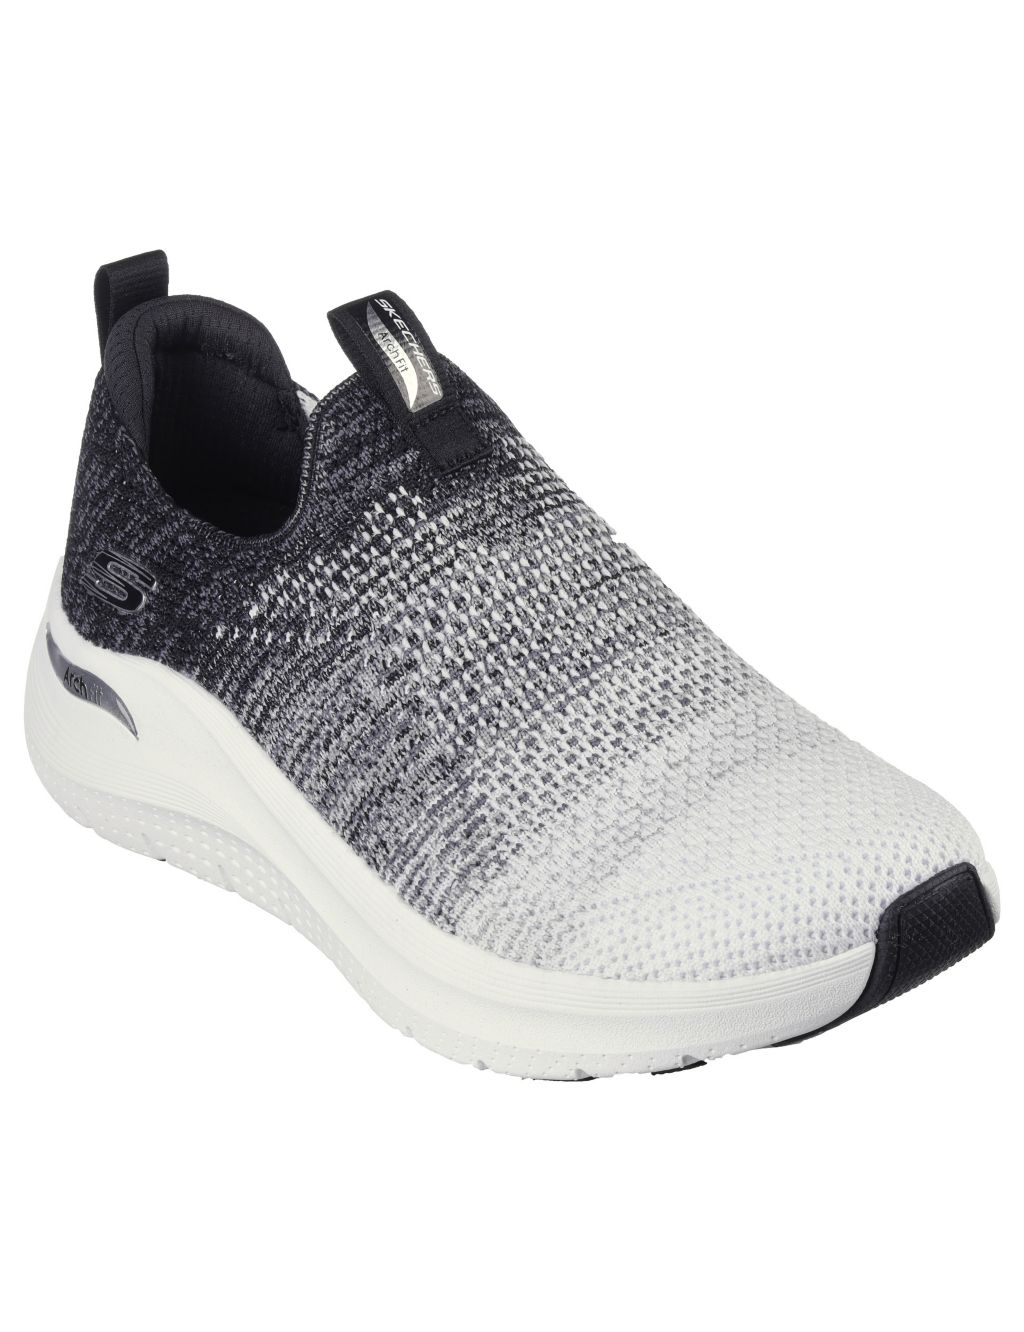 Arch Fit 2.0 Slip On Trainers | Skechers | M&S